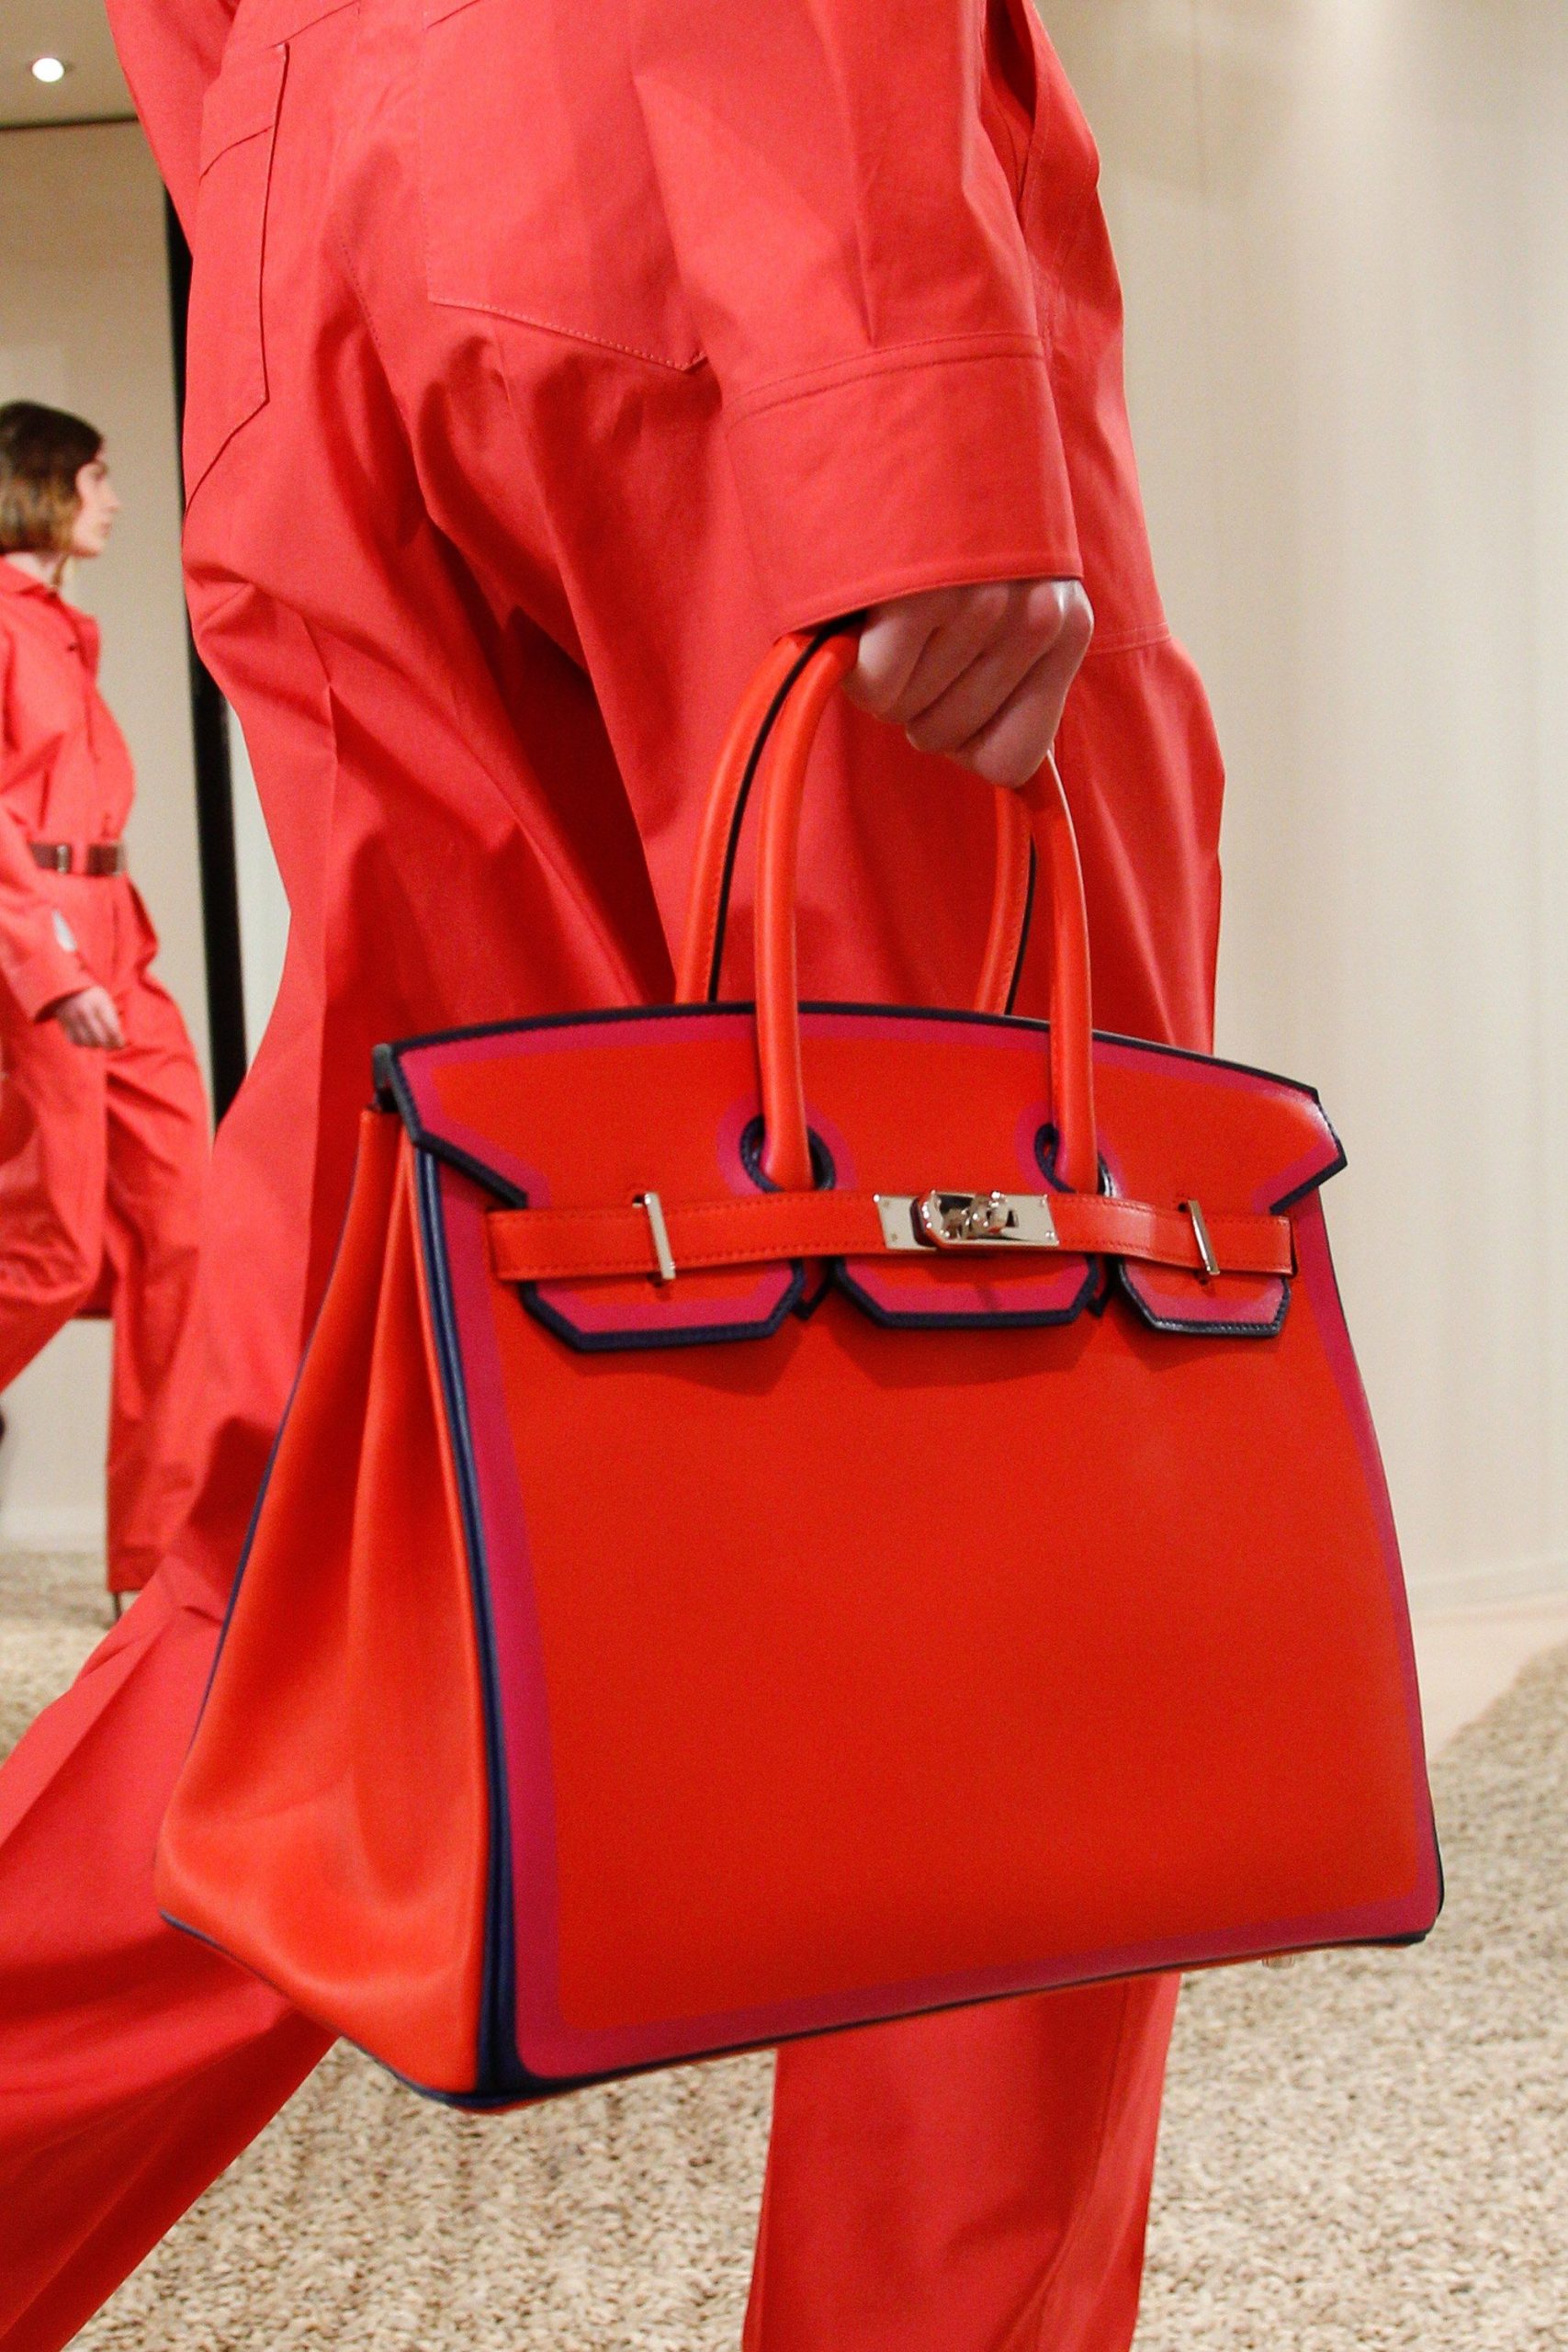 Bagging a return – why the Hermes Birkin handbag is the best investment, Investing